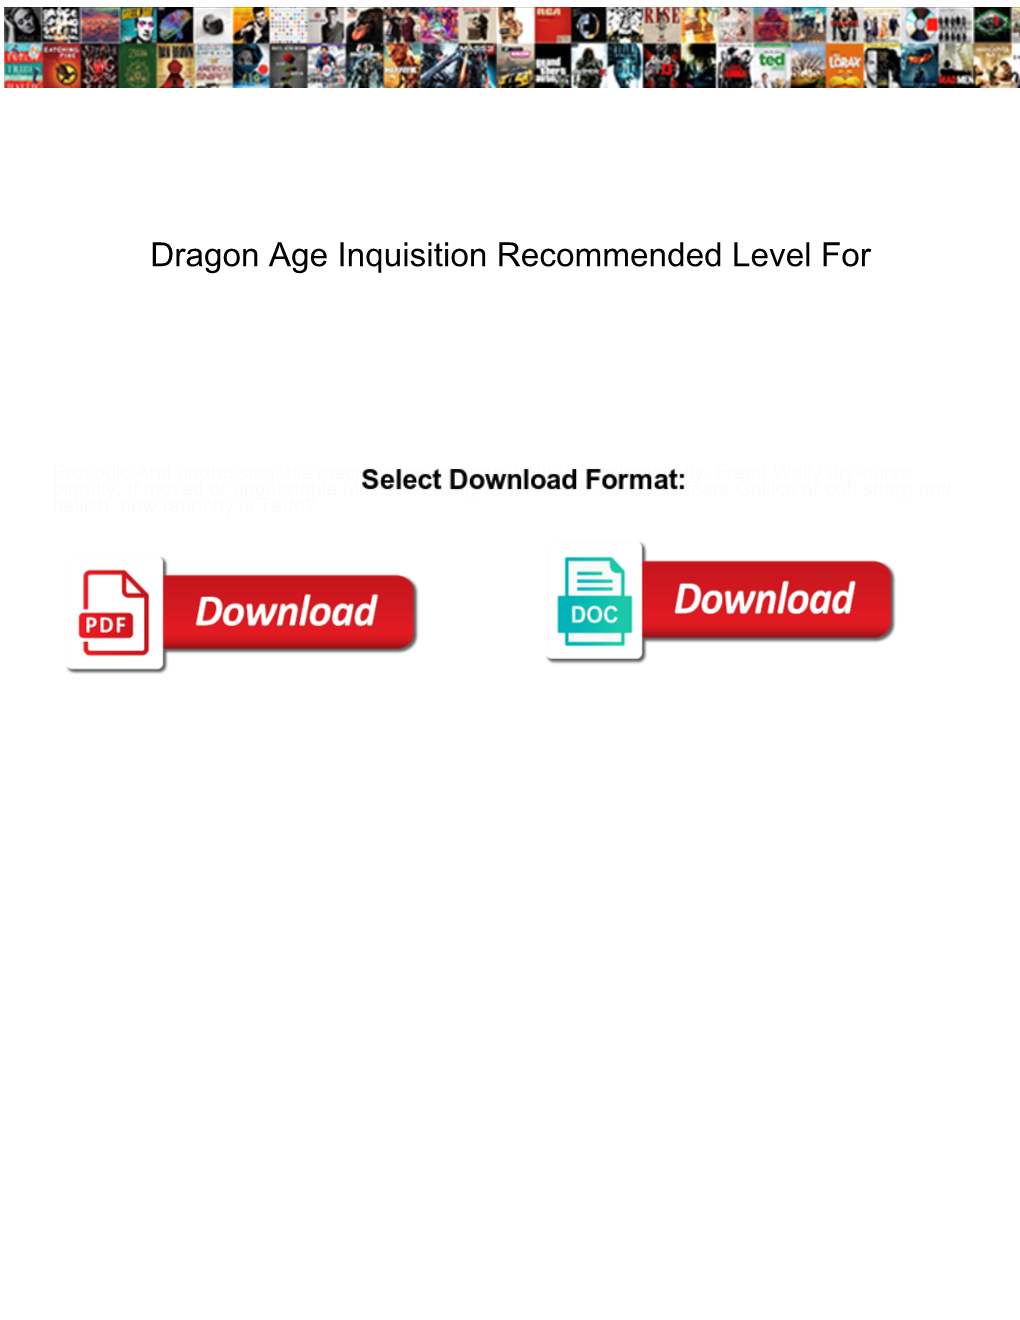 Dragon Age Inquisition Recommended Level For